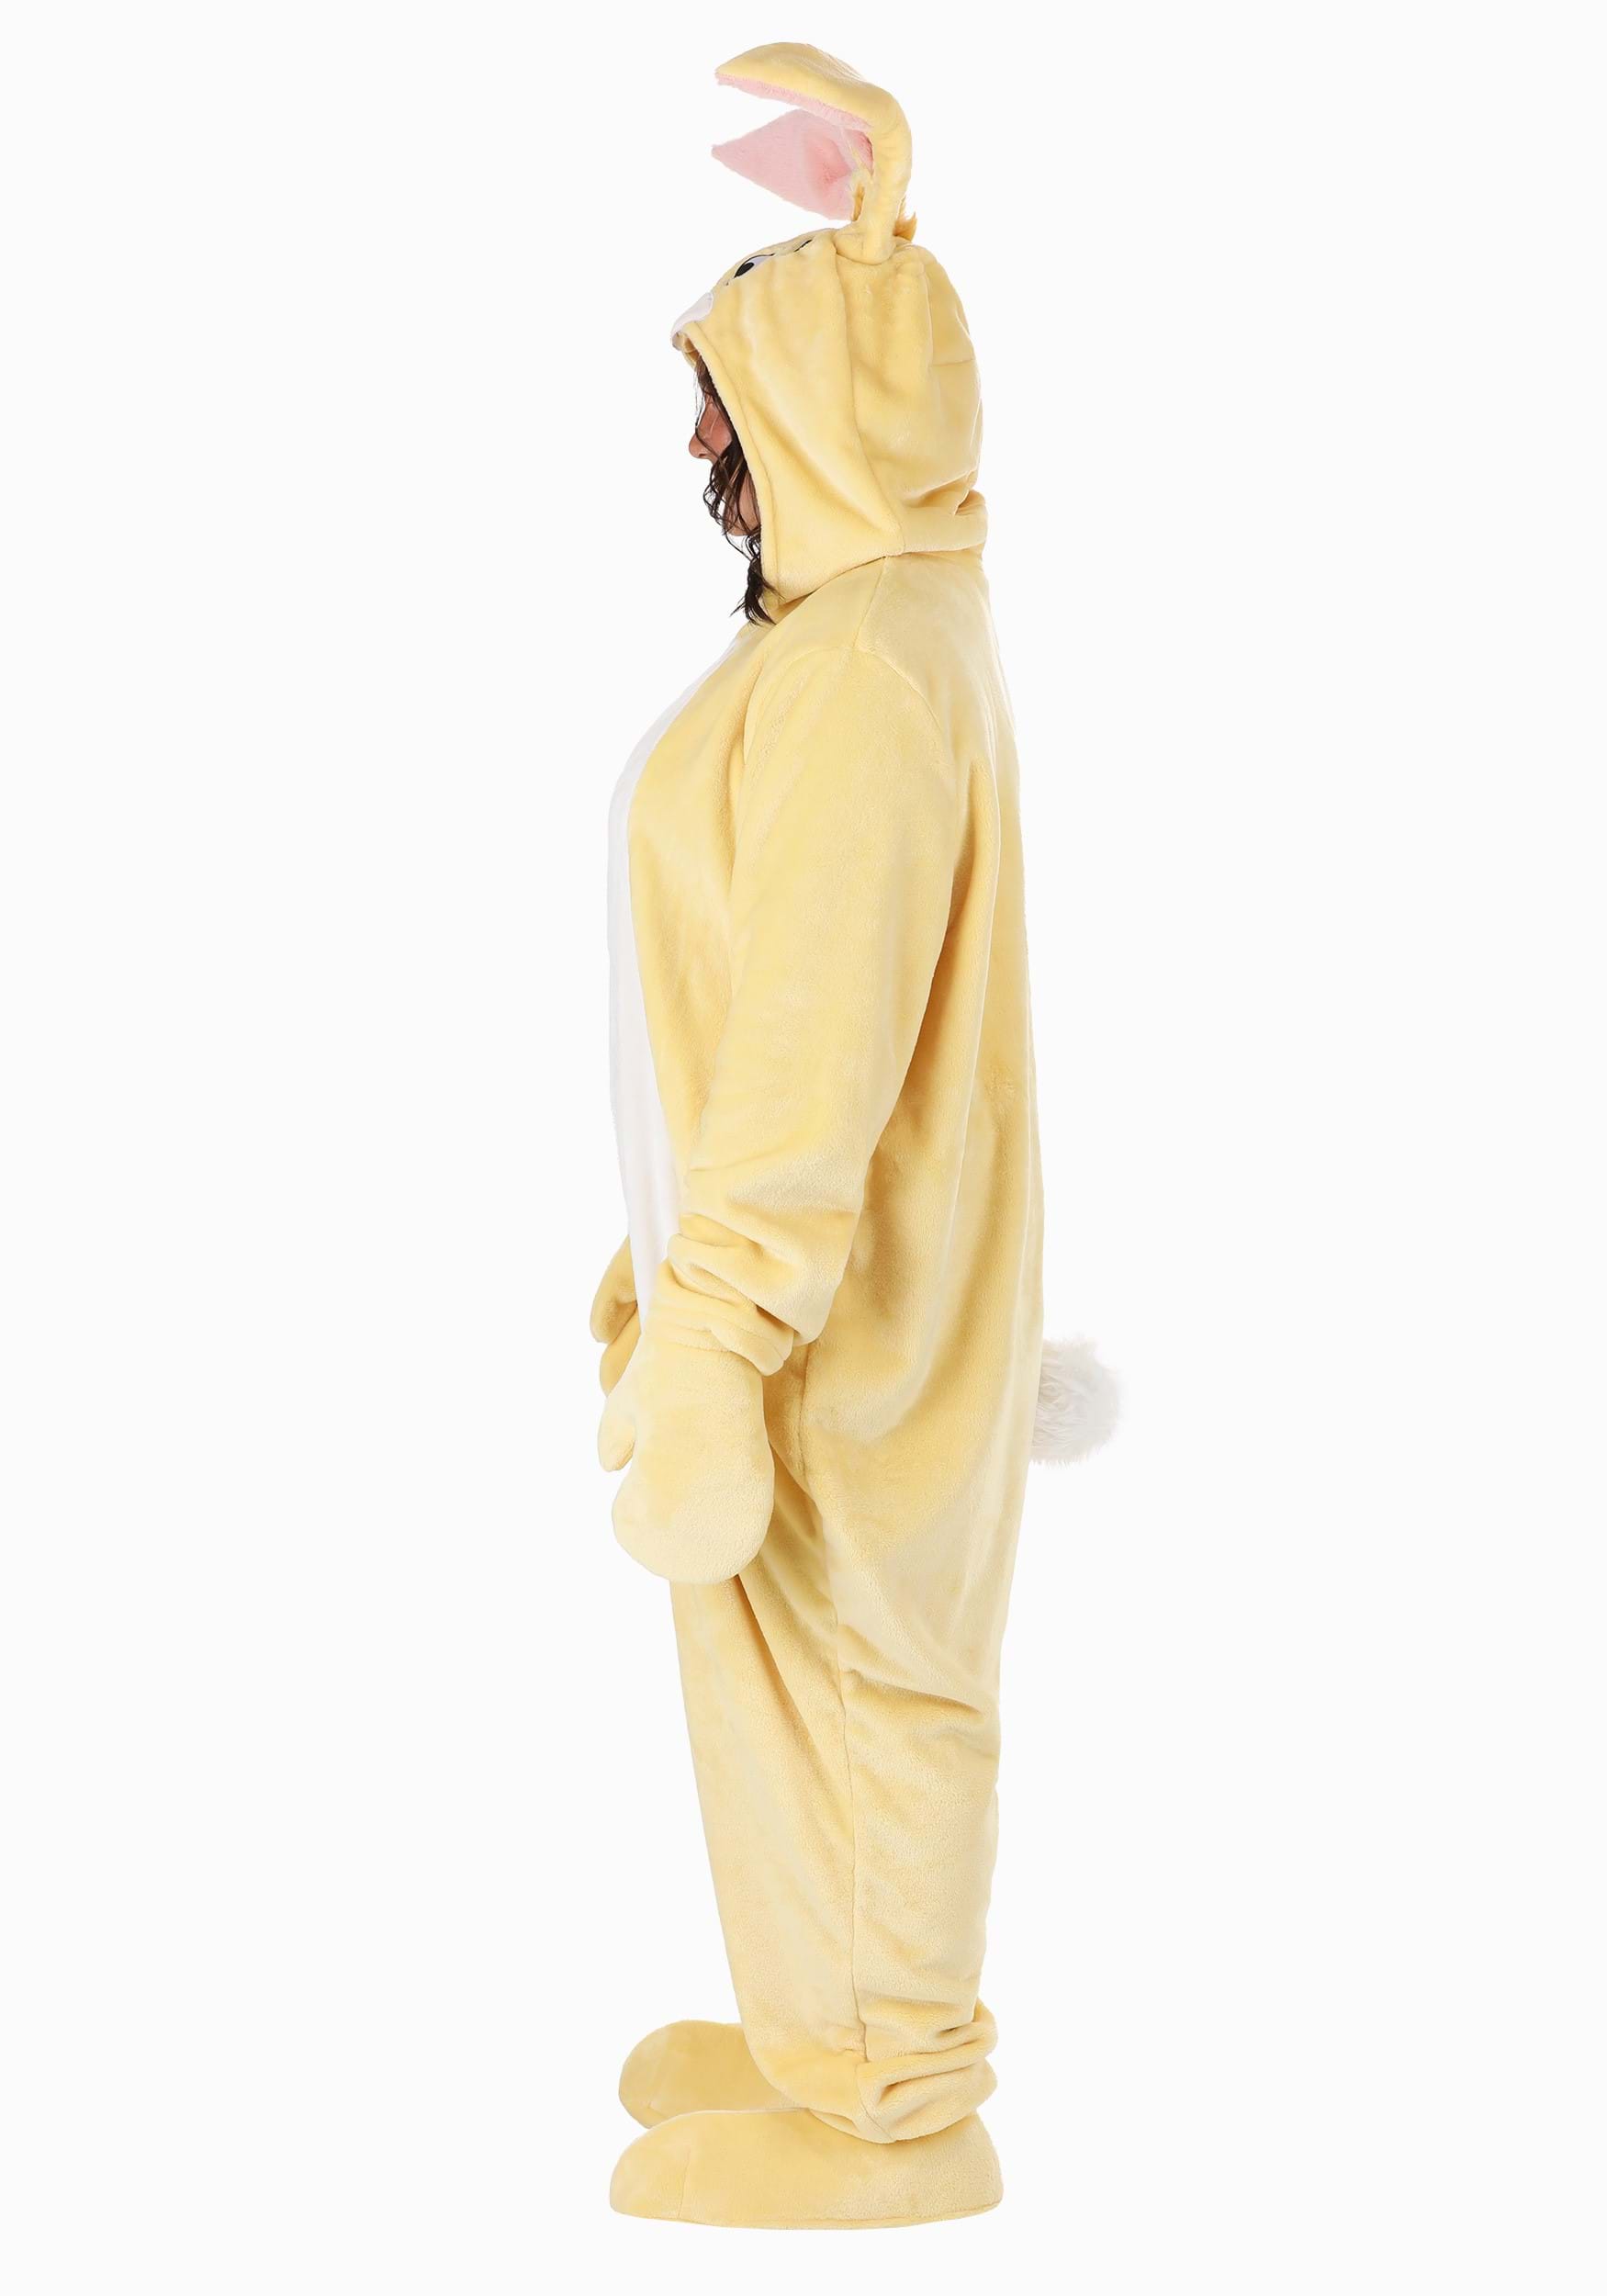  Disney Deluxe Winnie the Pooh Costume Adult Plus Size, Disney's  Winnie the Pooh Hooded Onesie Halloween Costume 2X : Clothing, Shoes &  Jewelry